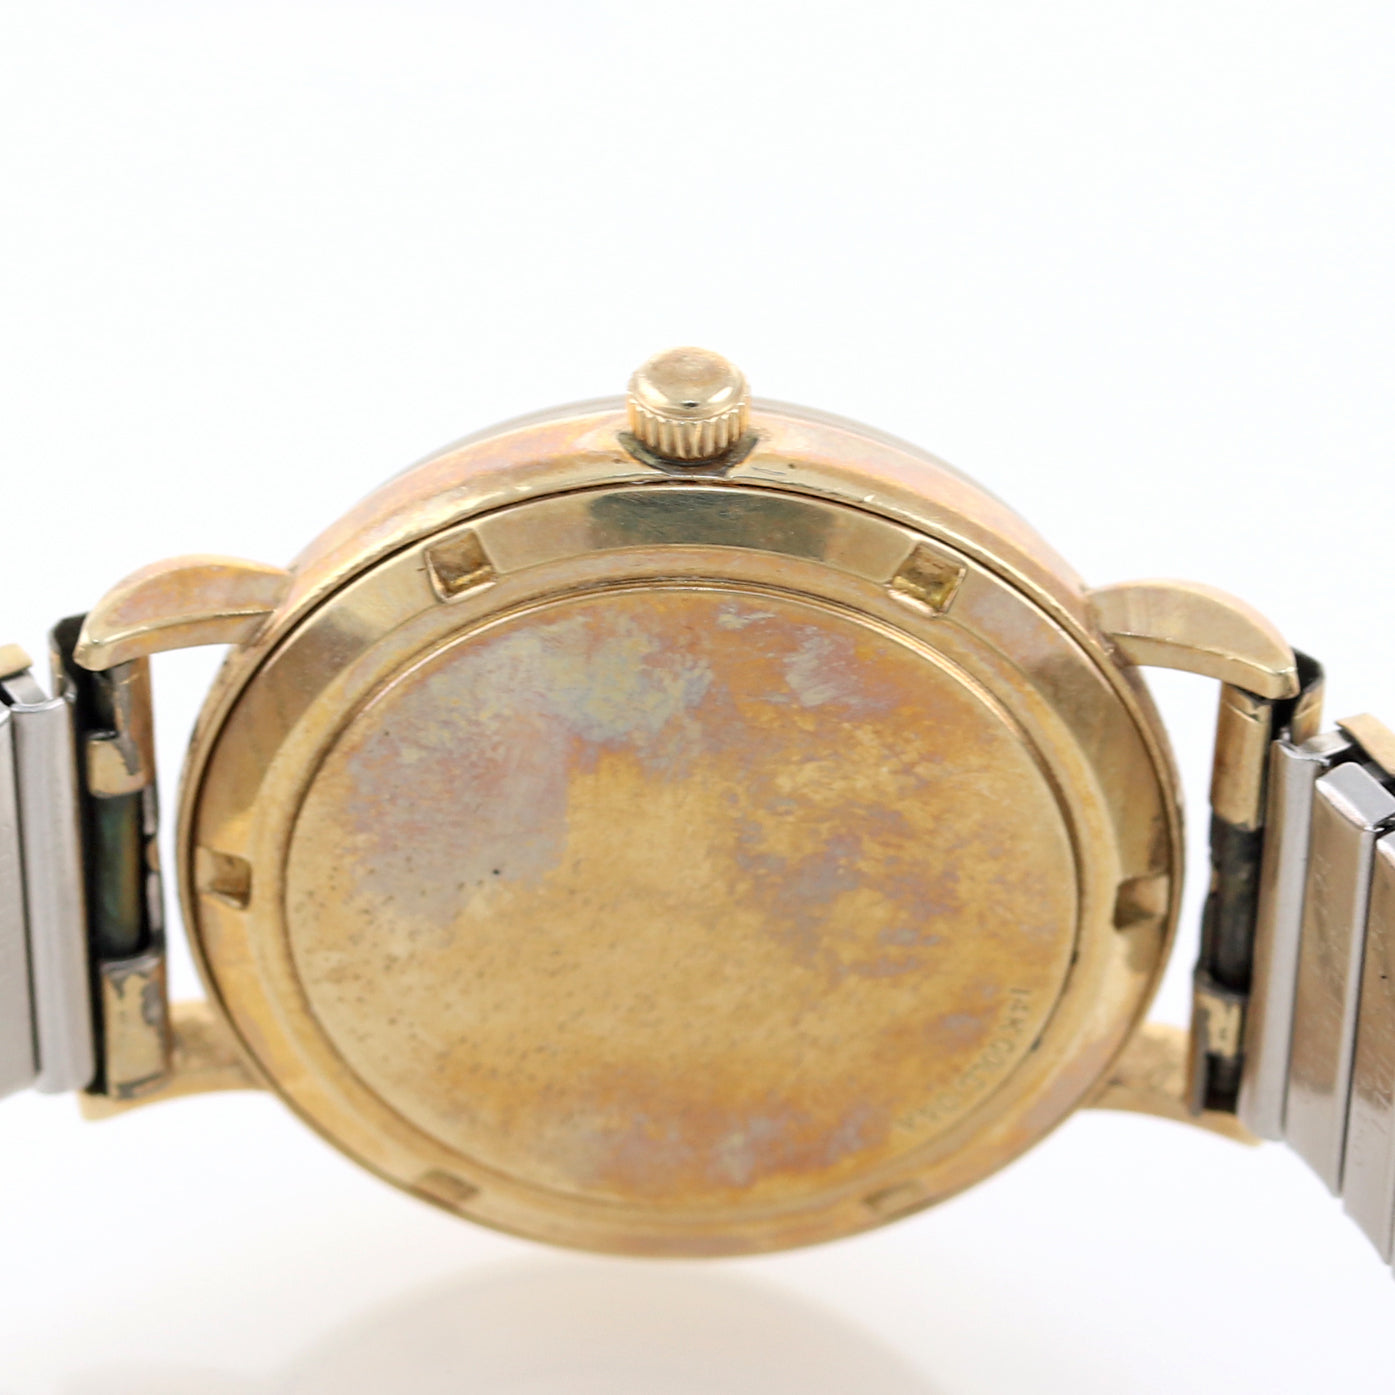 VTG Le Coultre 14k Yellow Gold Mystery Dial Automatic Bumper Movement Watch